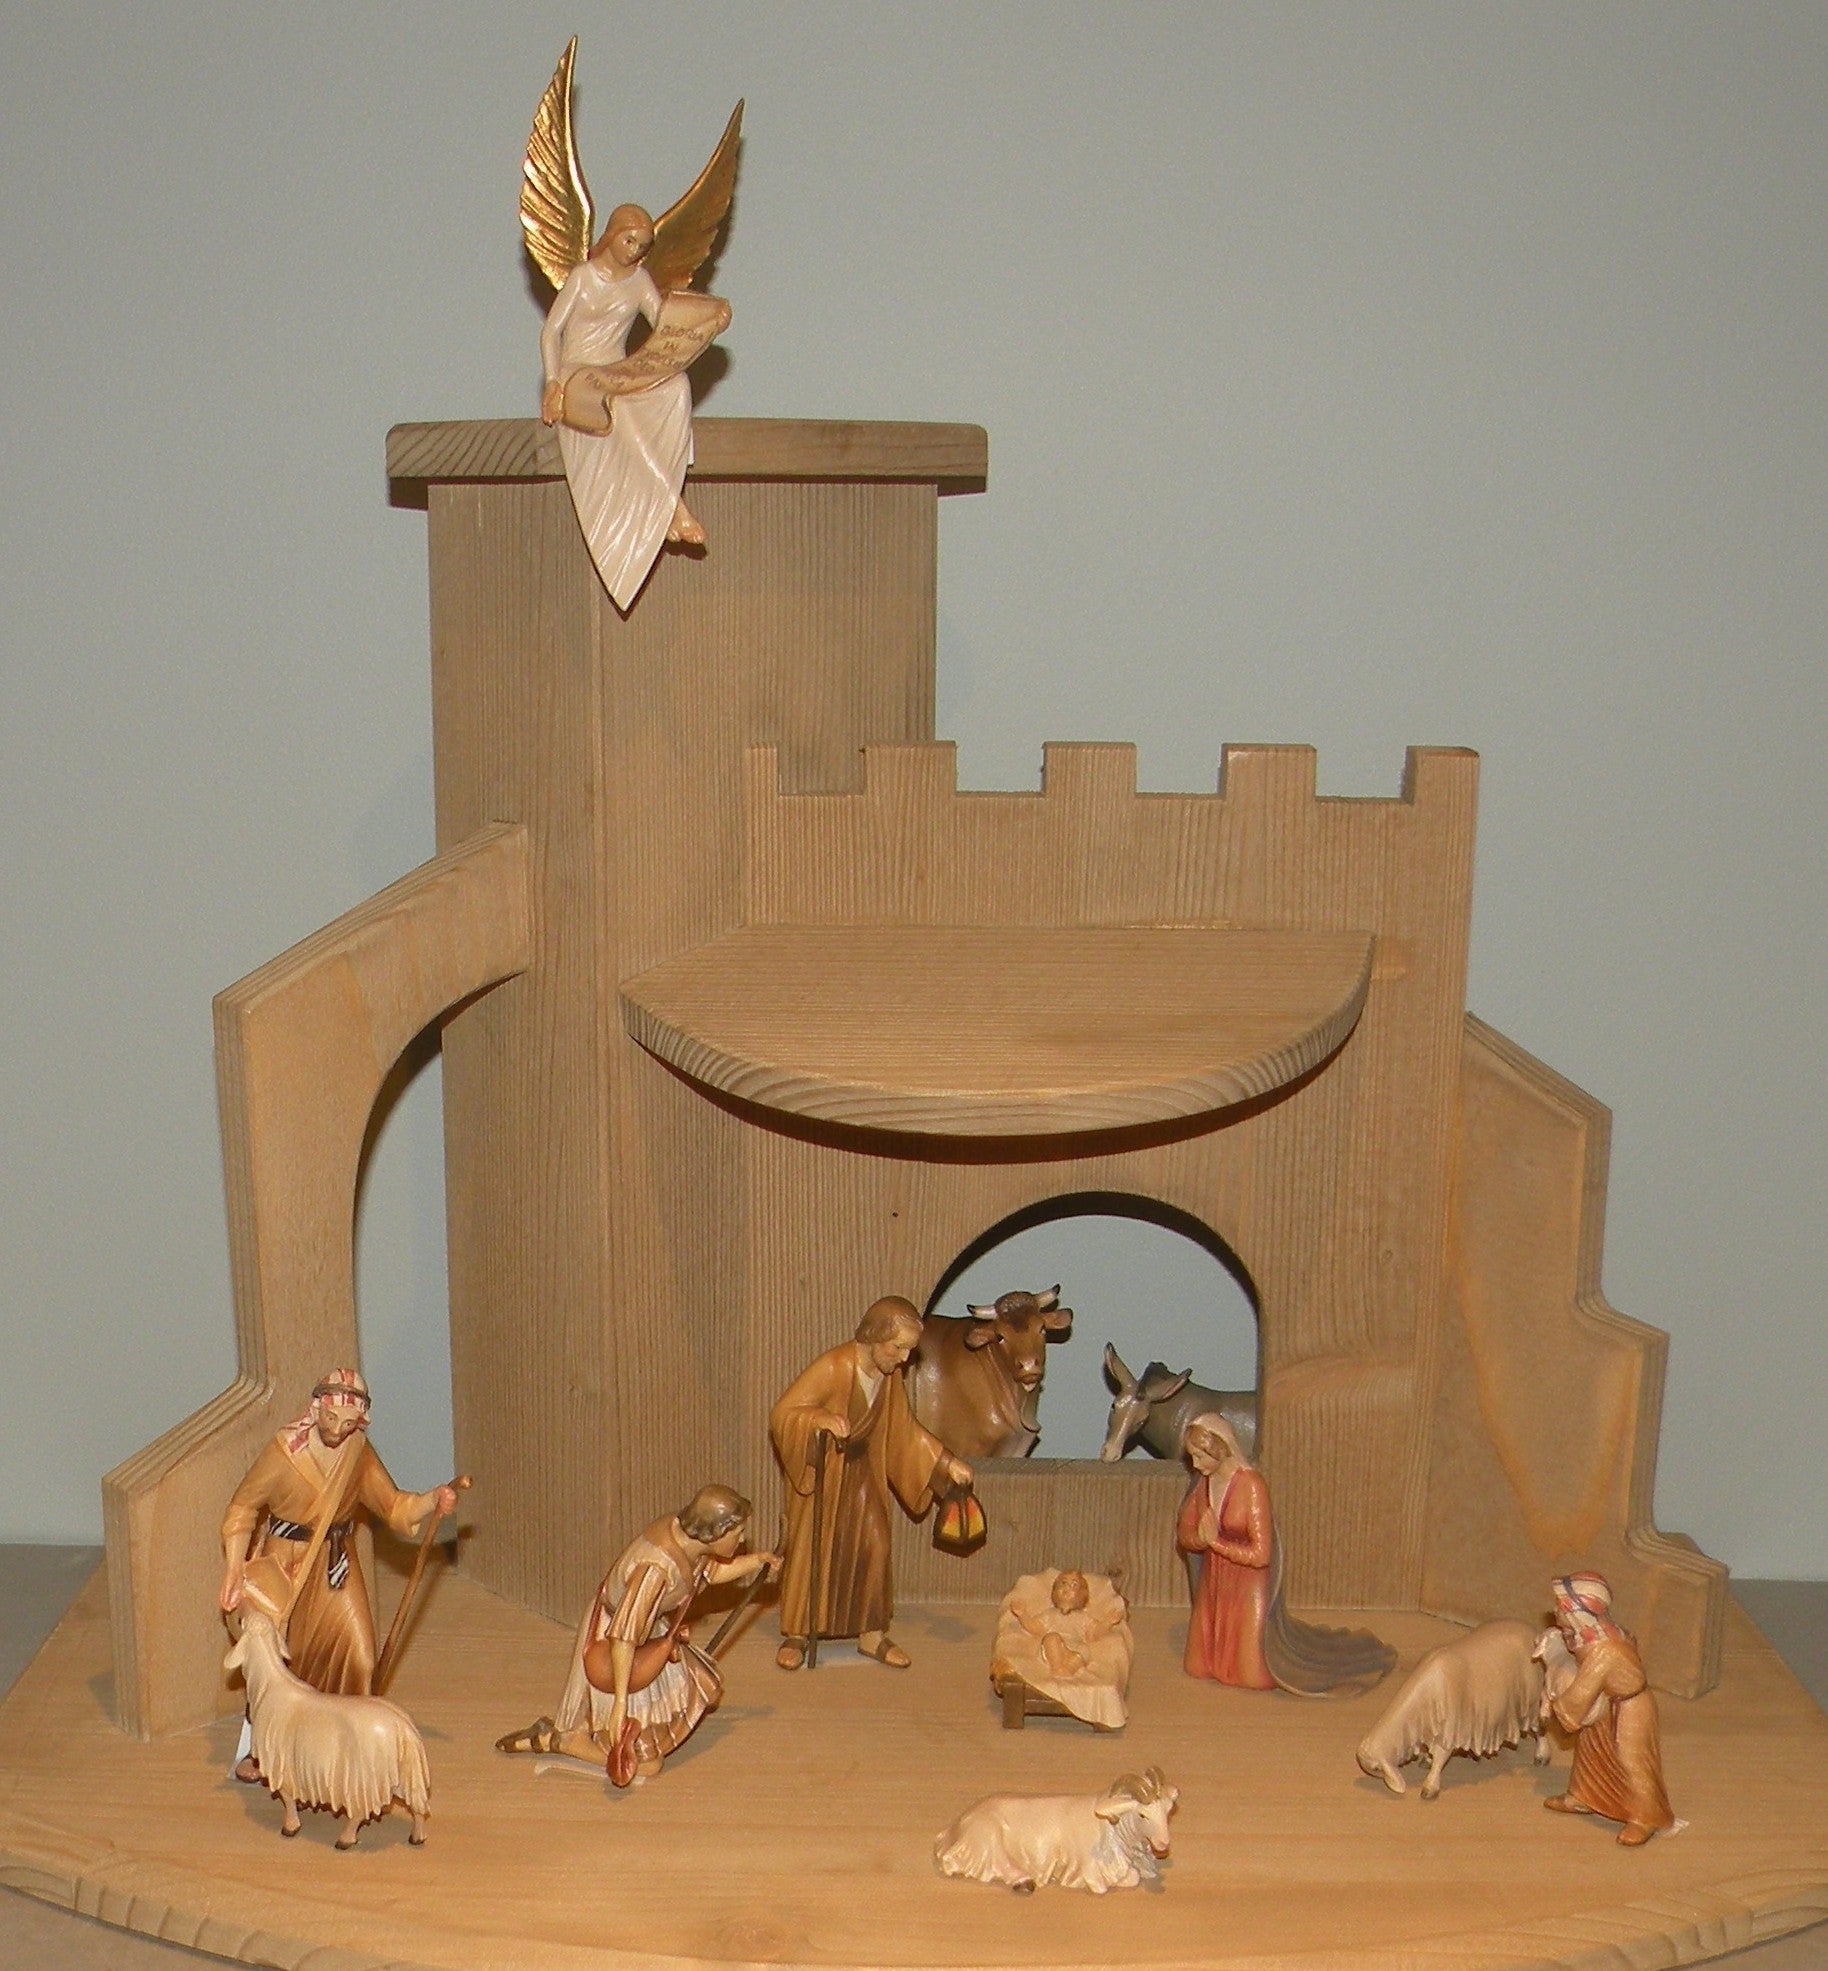 Complet set of 12 Pieces with the Stable - Venetian Nativity